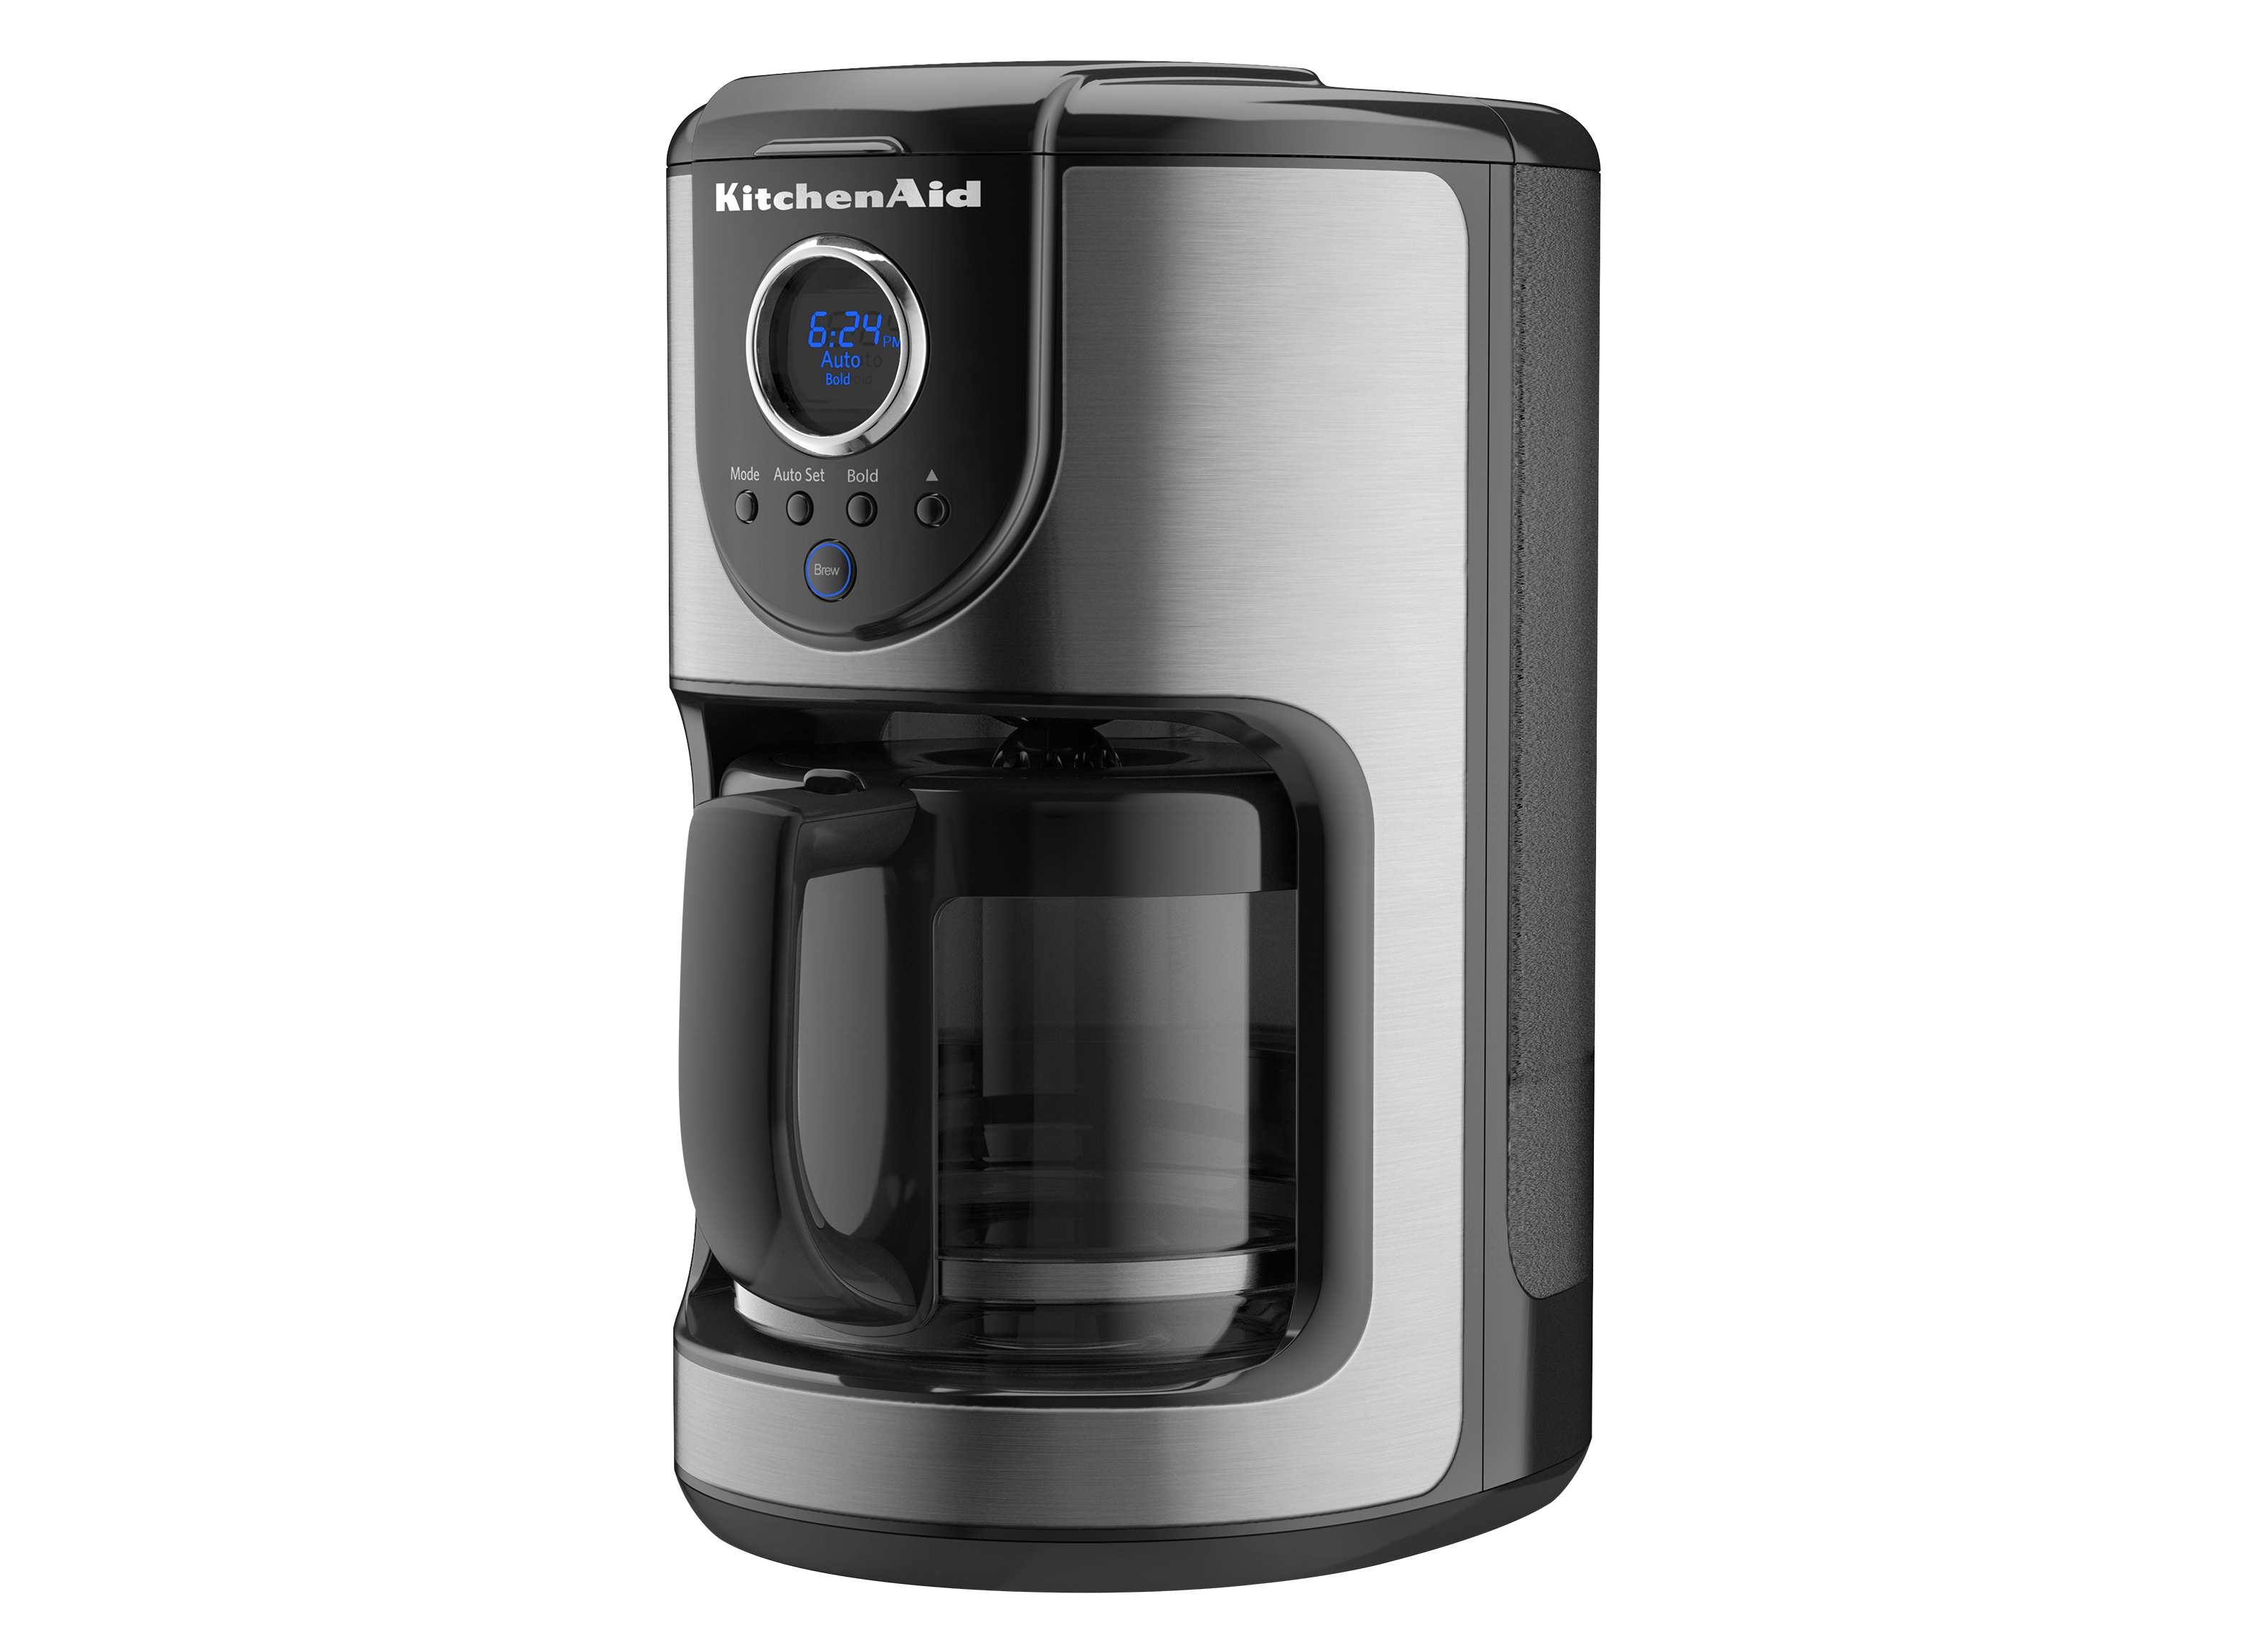 https://crdms.images.consumerreports.org/prod/products/cr/models/394539-coffeemakers-kitchenaid-12cupkcm111ob.png